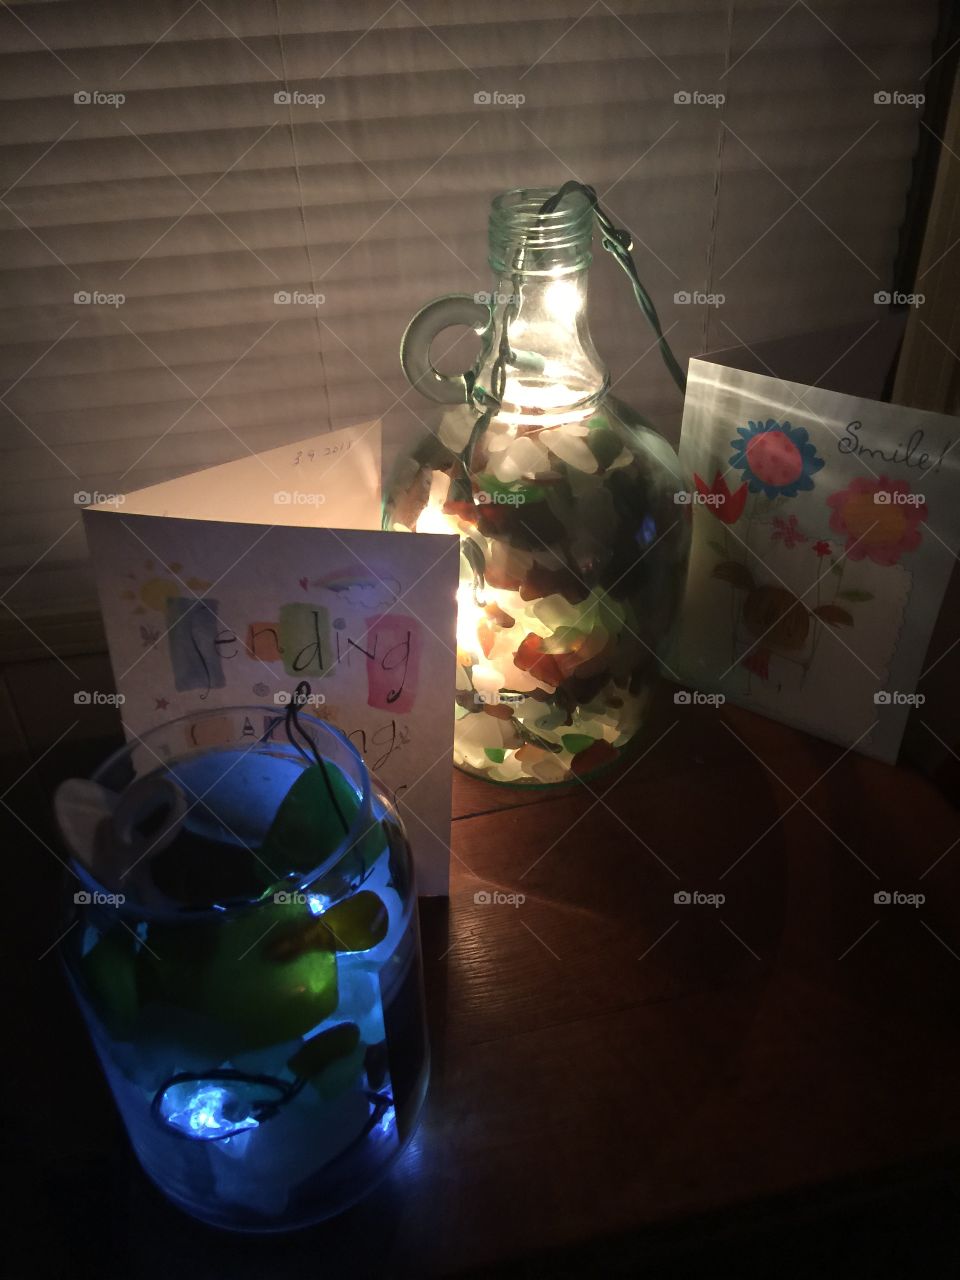 Pretty Seaglass in lighted jars and greeting cards from a special person